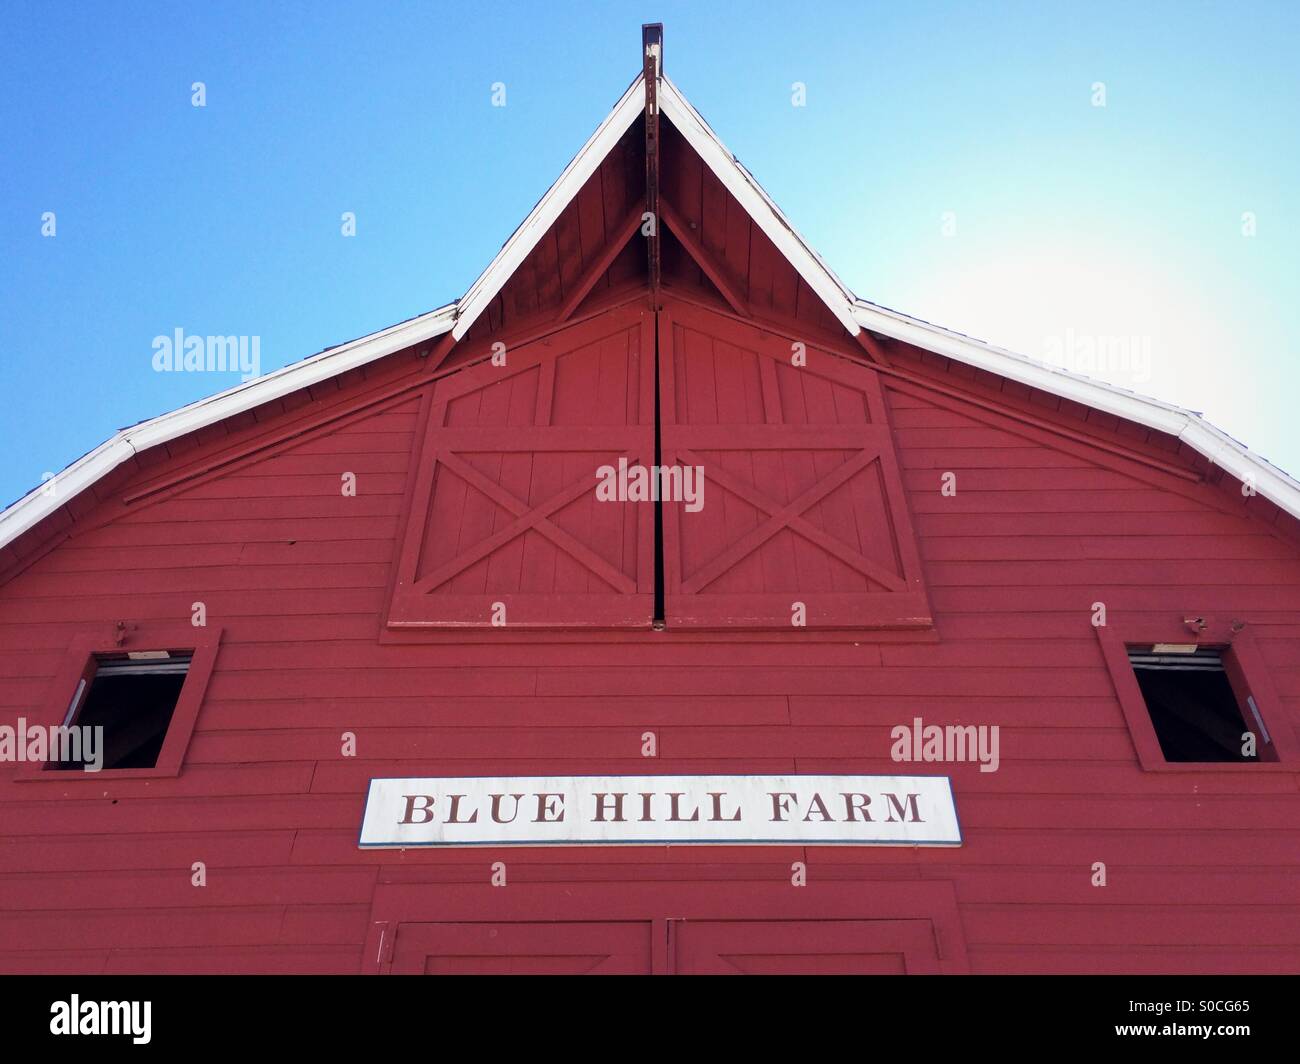 A red barn at Blue Hill Farm in Great Barrington, MA, owned by renowned chef Dan Barber. Stock Photo